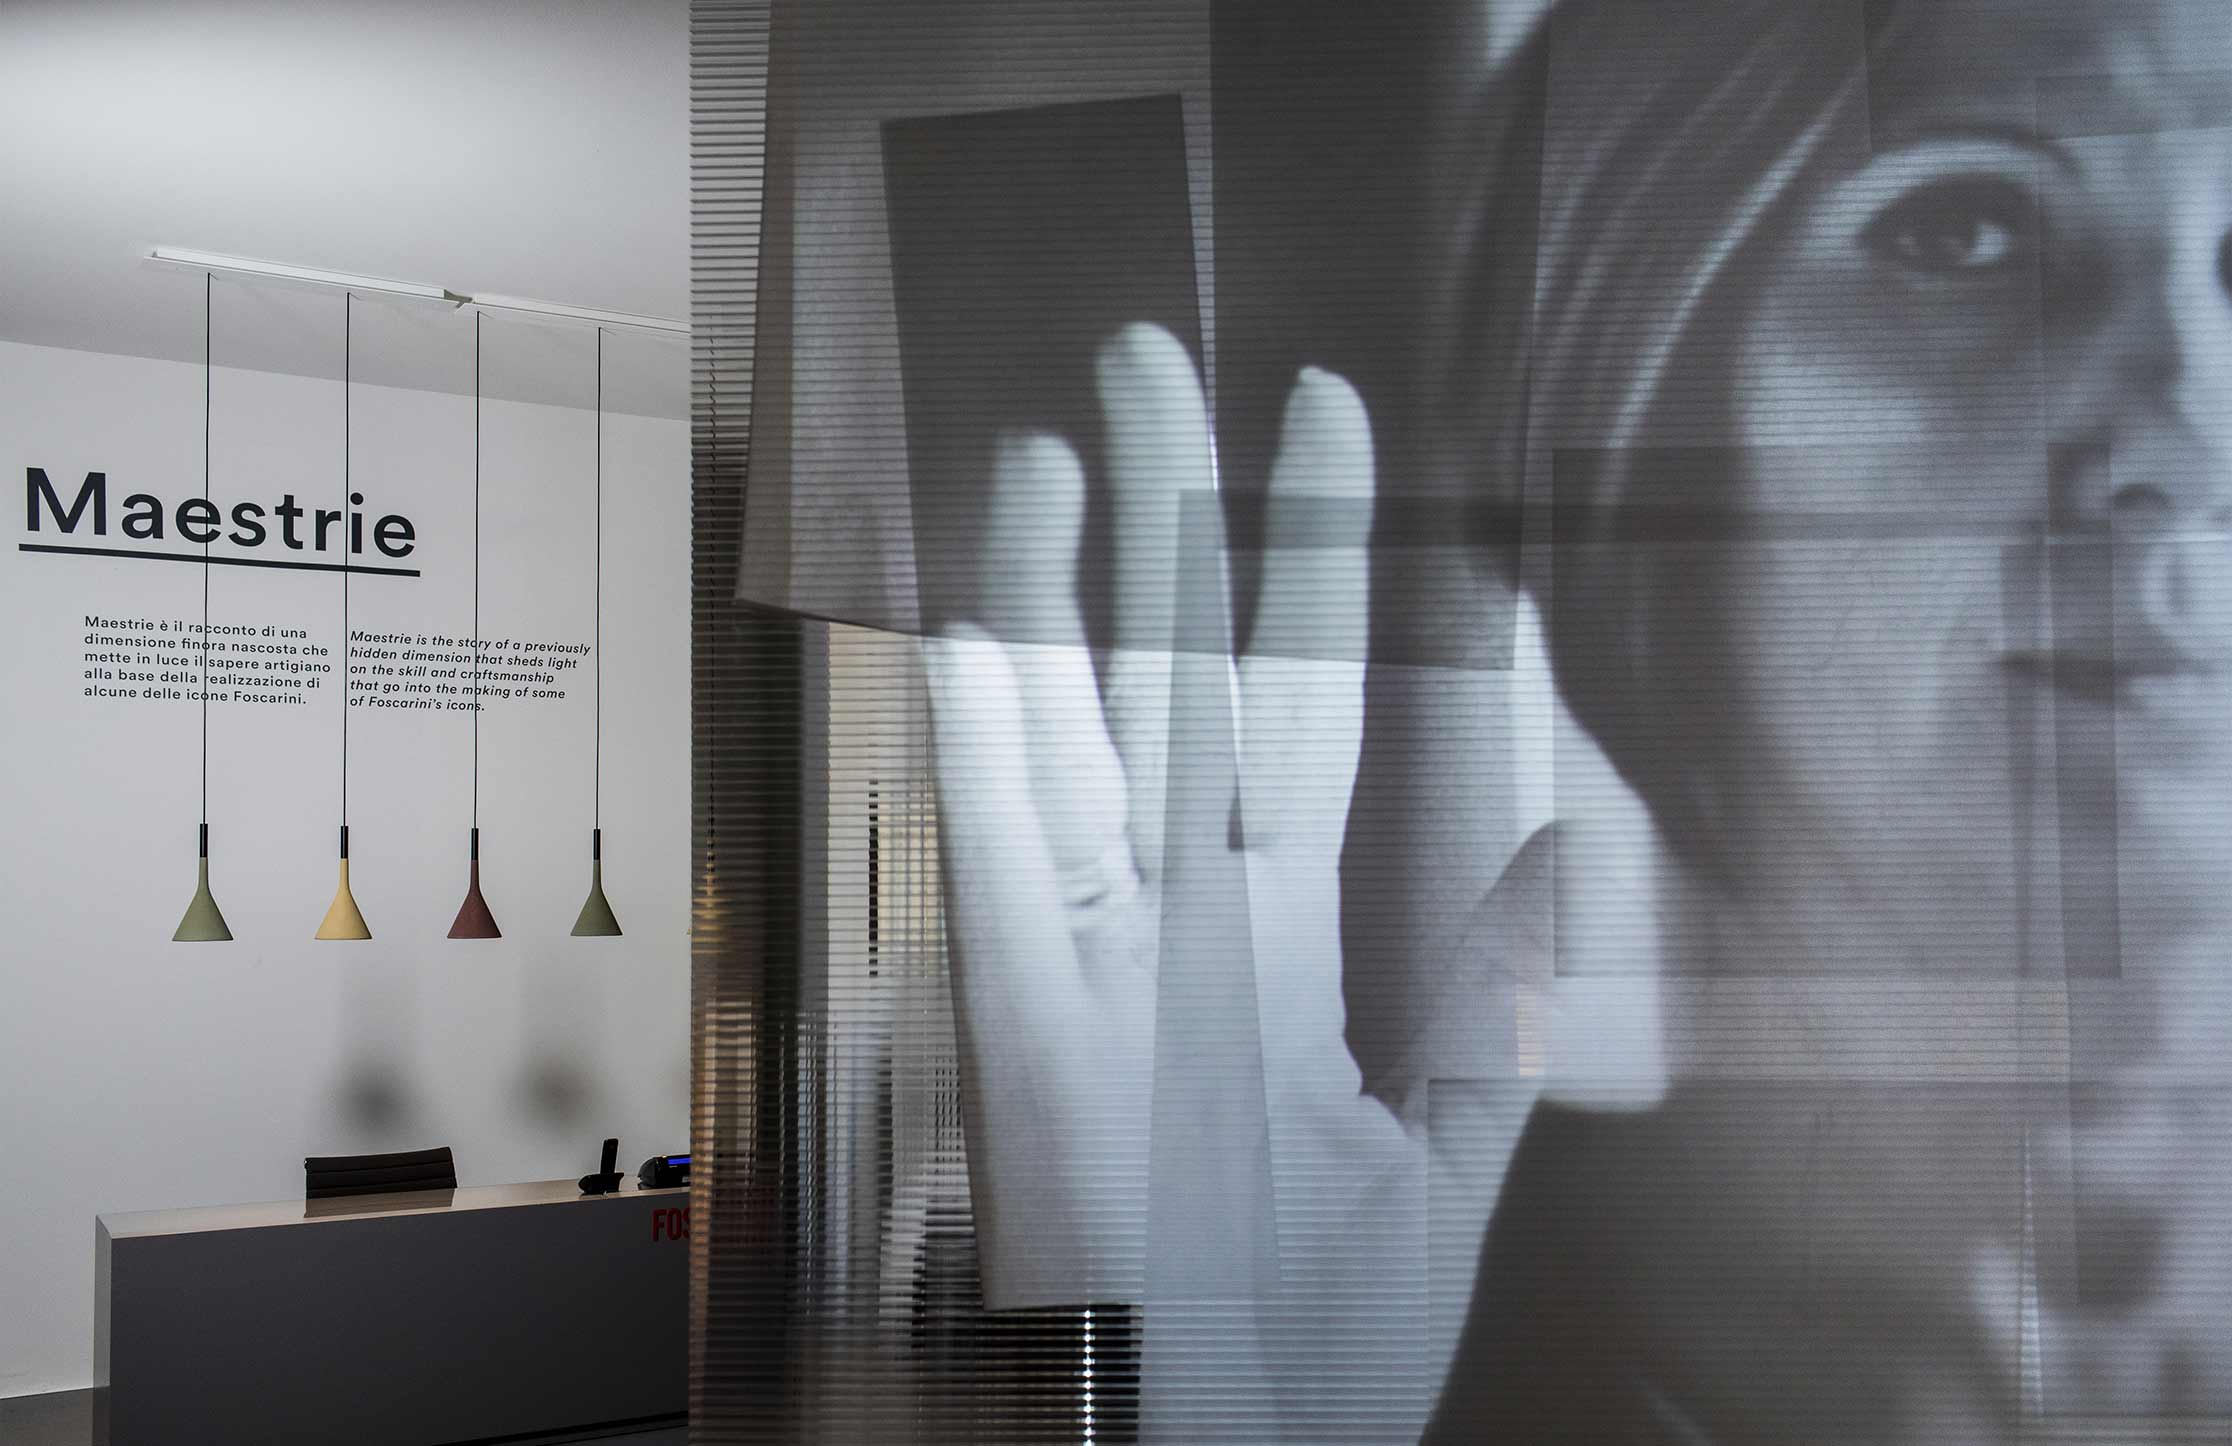 A multisensorial installation for Maestrie